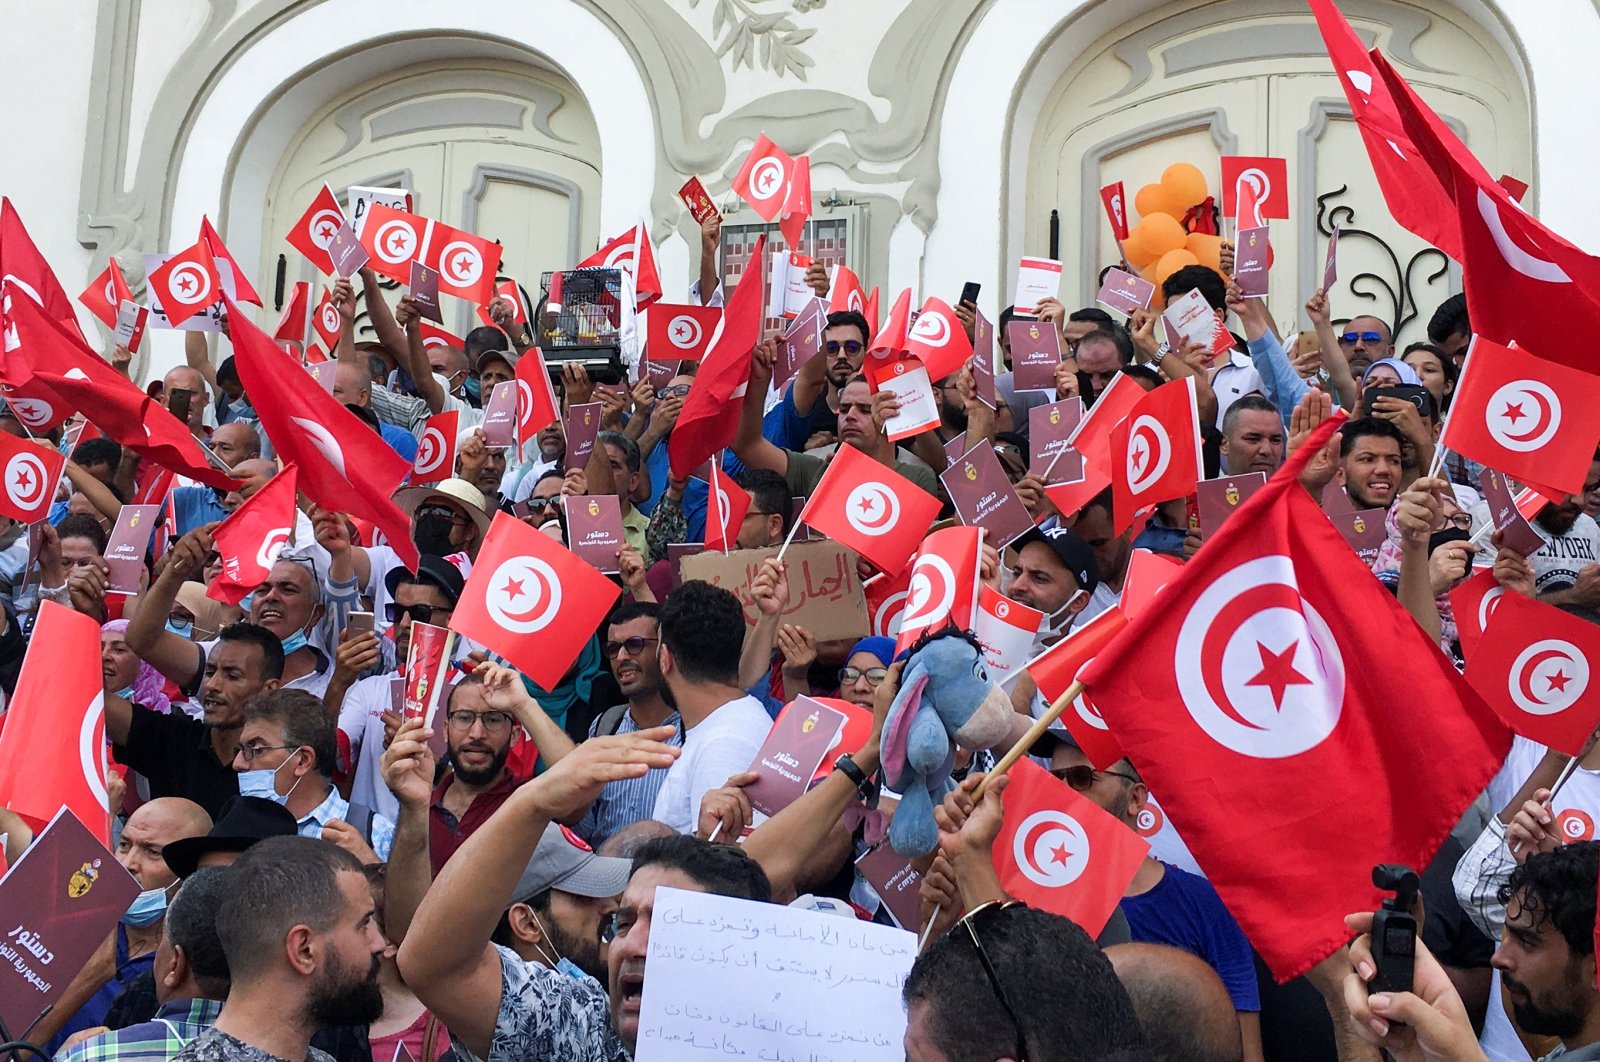 Demonstrators carry flags during a protest against Tunisian President Kais Saied's seizure of governing powers, in Tunis, Tunisia, September 26, 2021. (Reuters Photo)